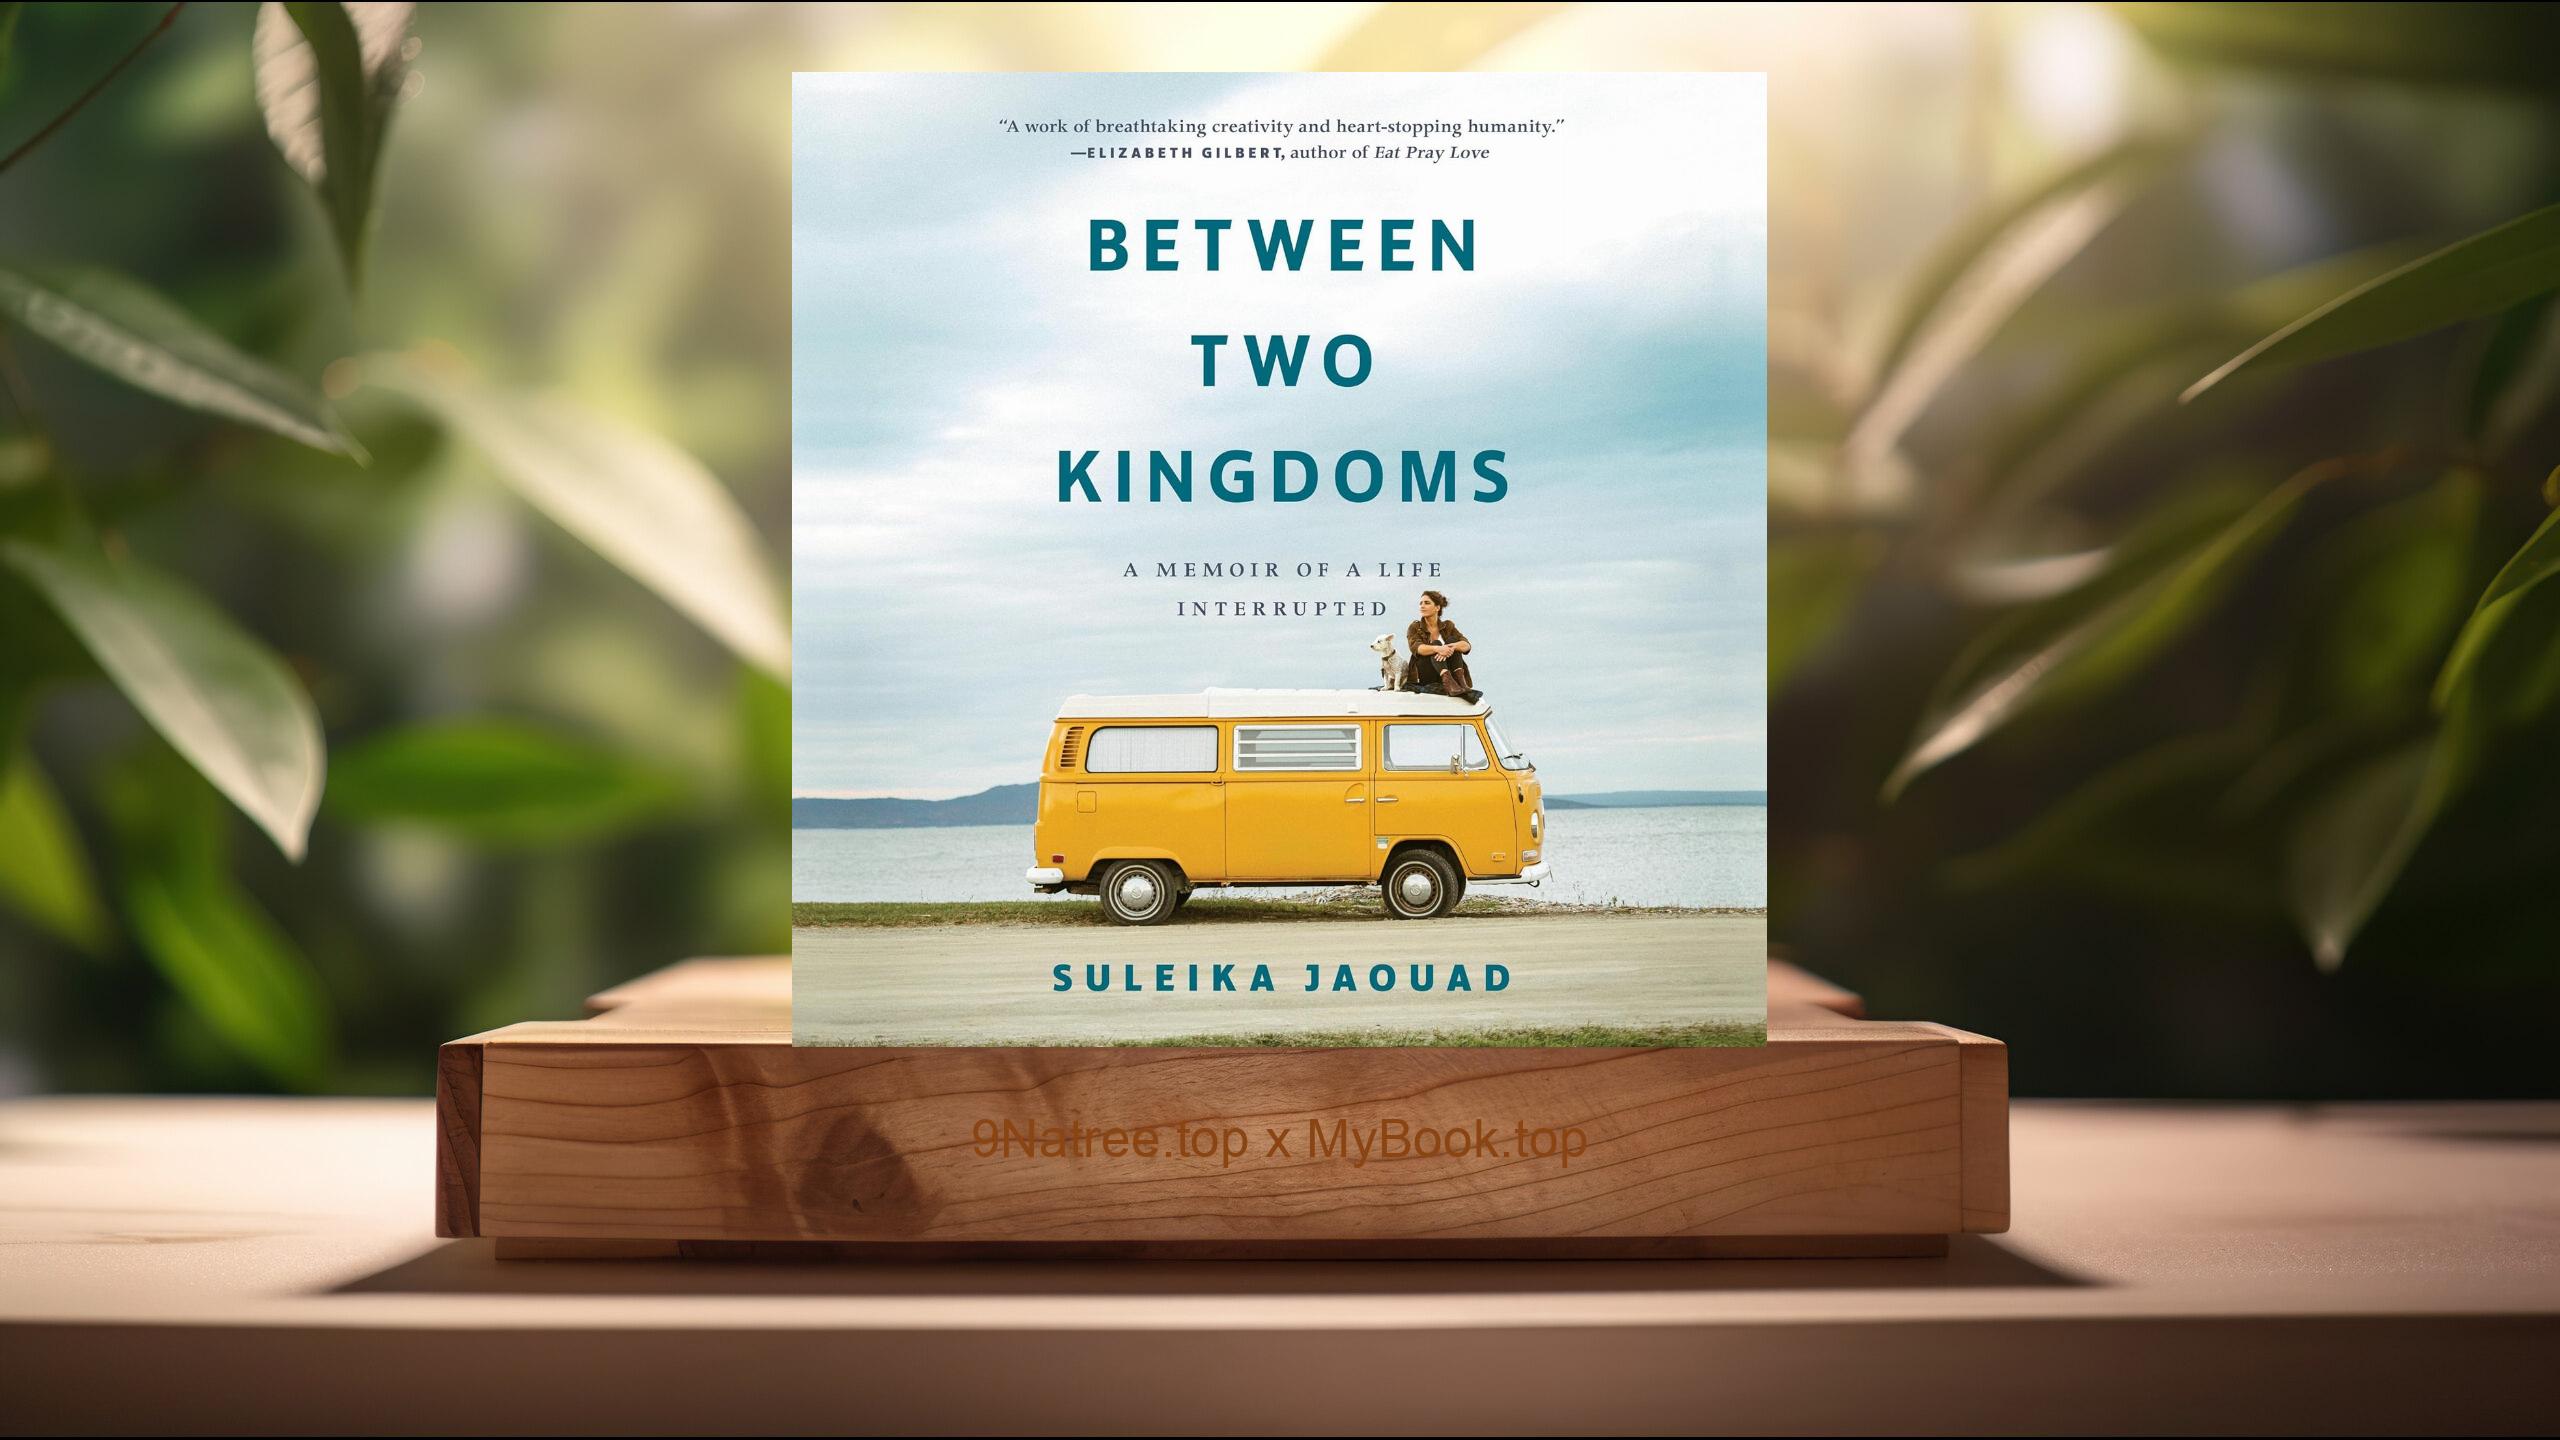 [Review] Between Two Kingdoms: A Memoir of a Life Interrupted (Suleika Jaouad) Summarized